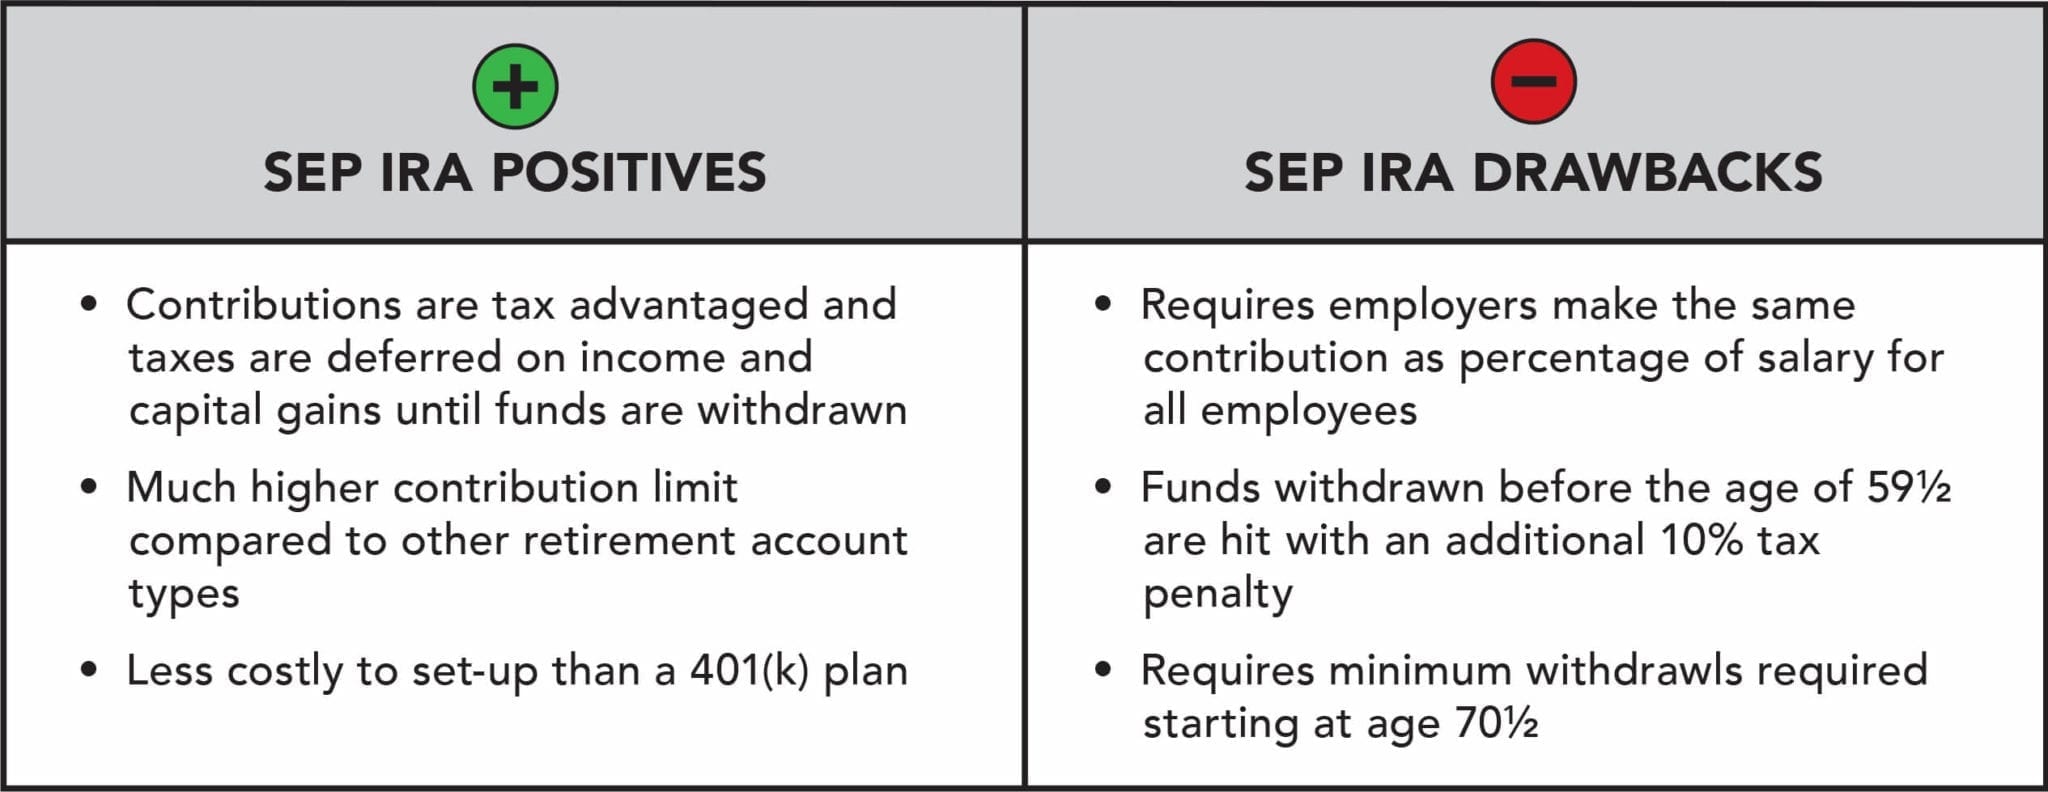 The SEP IRA has several beenfits but also some limitations.